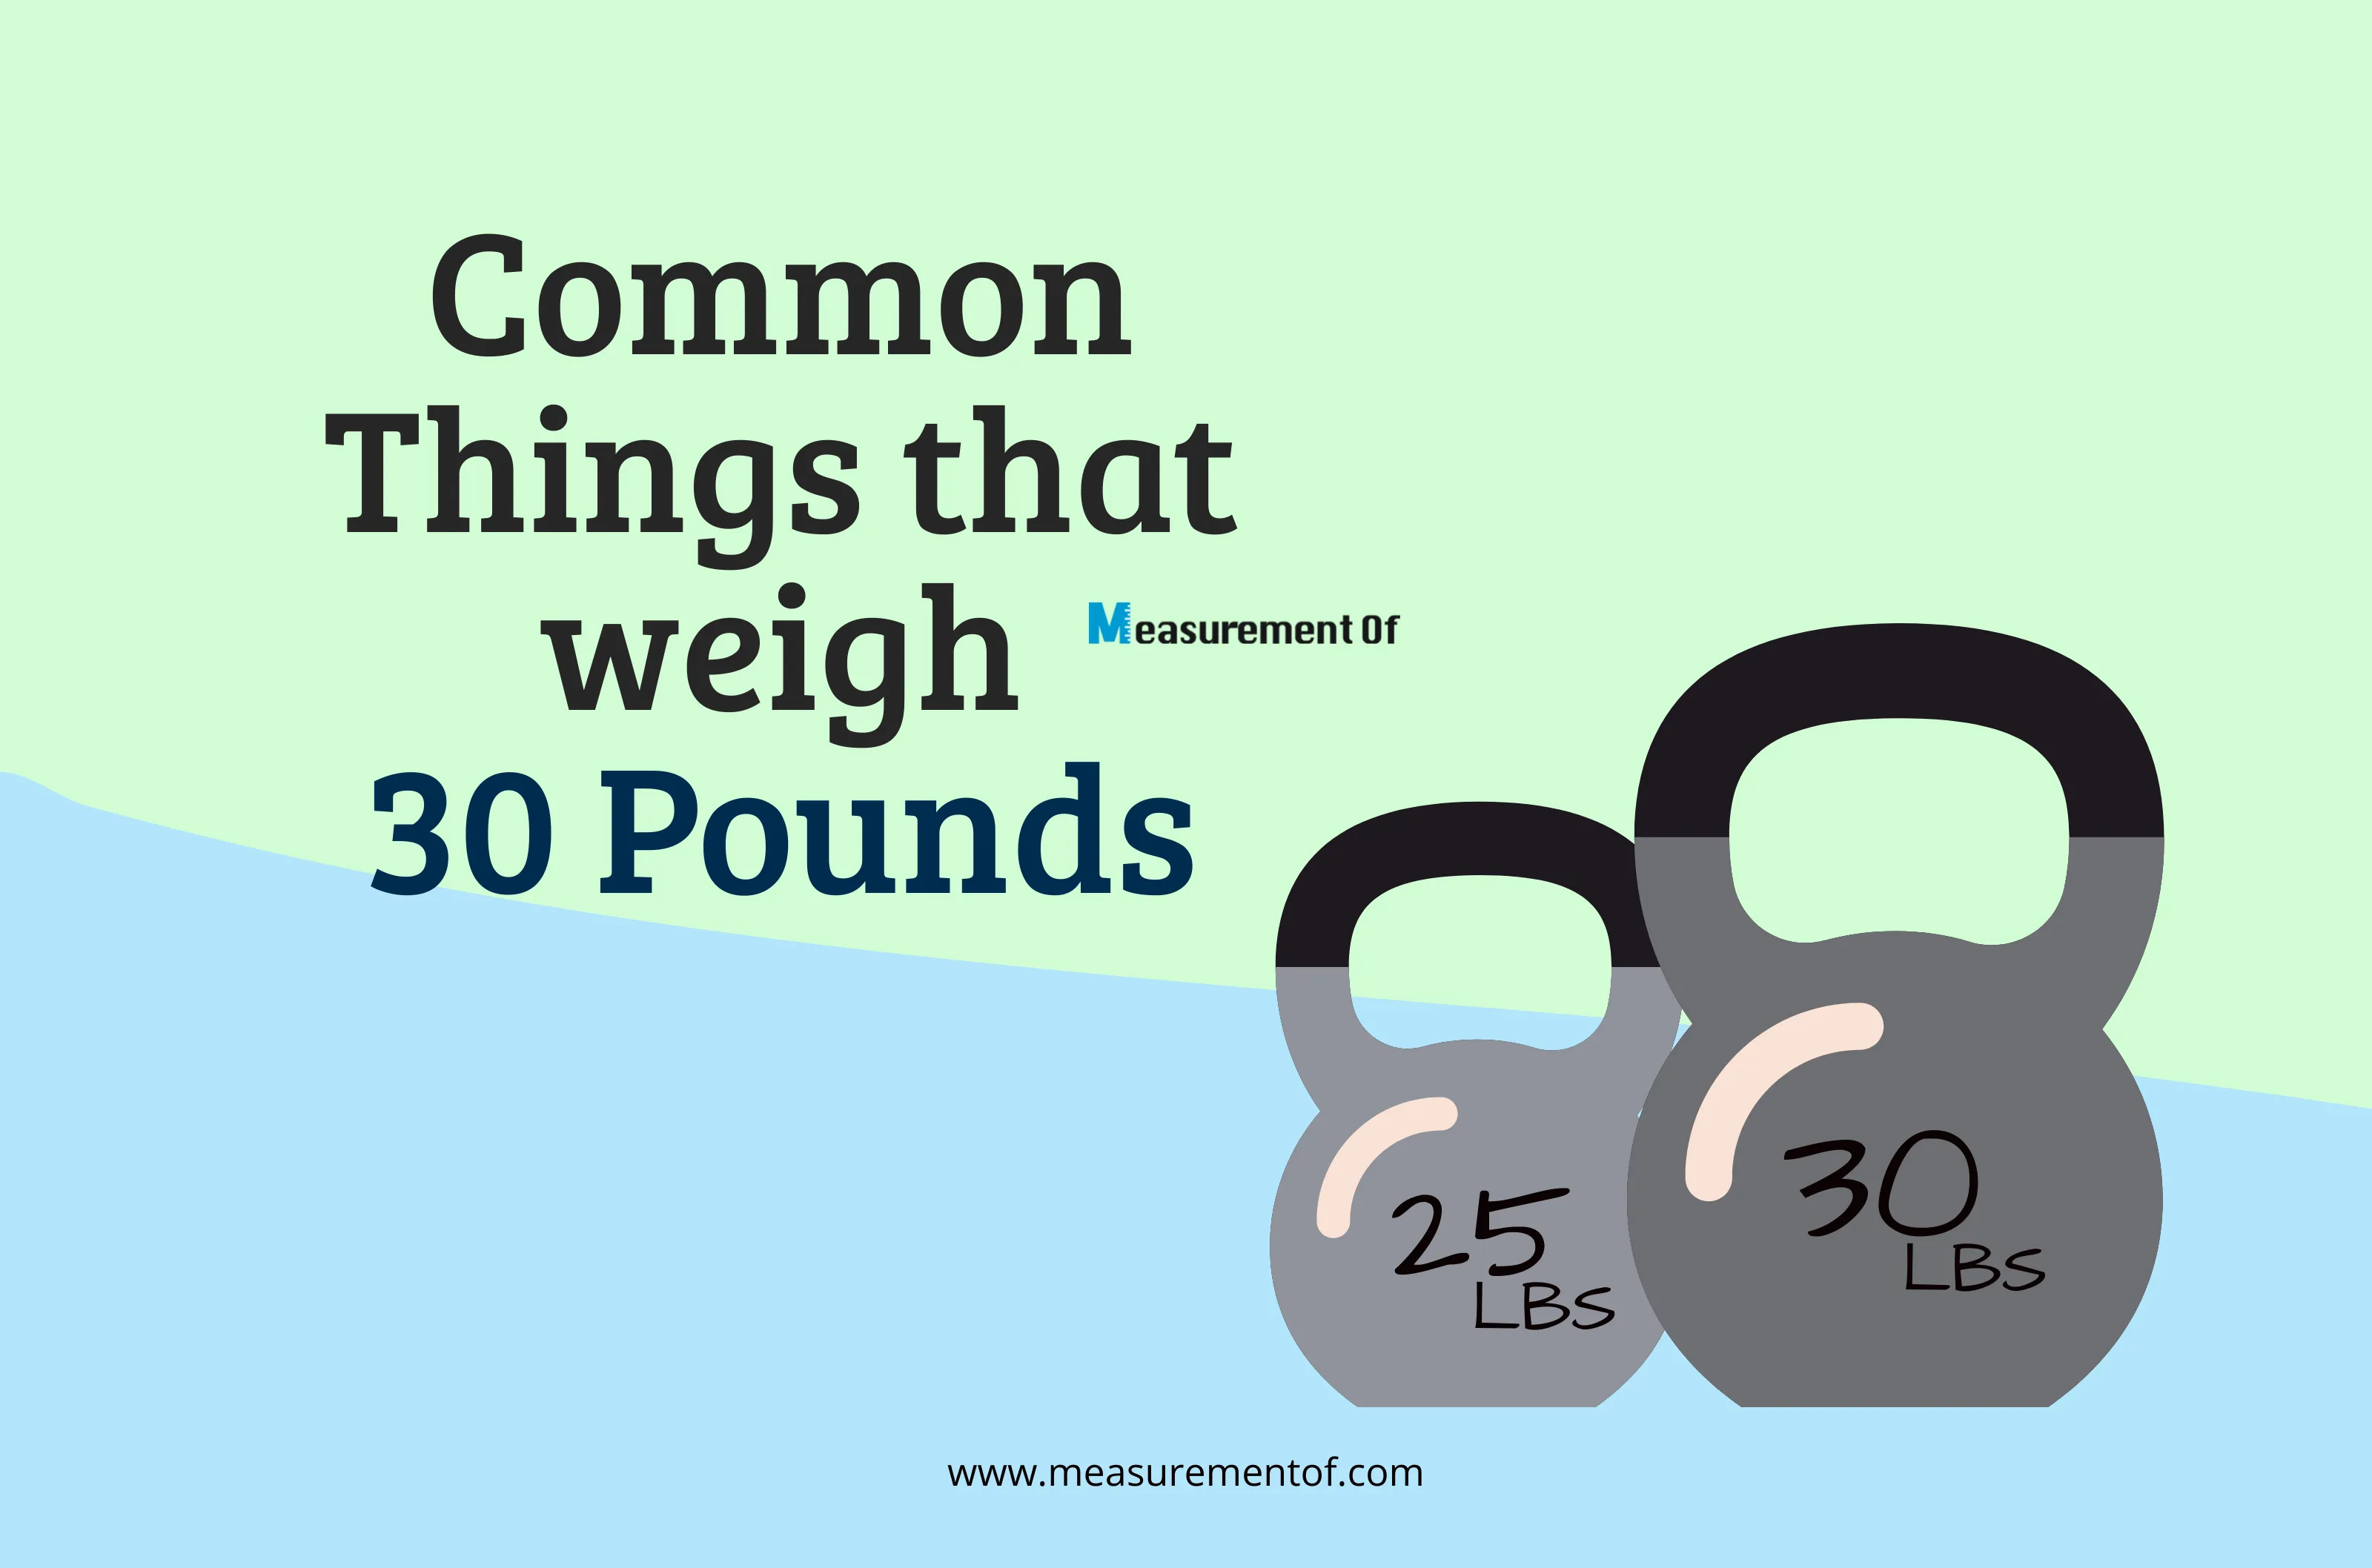 10 Common Things That Weigh 30 Pounds bog banner